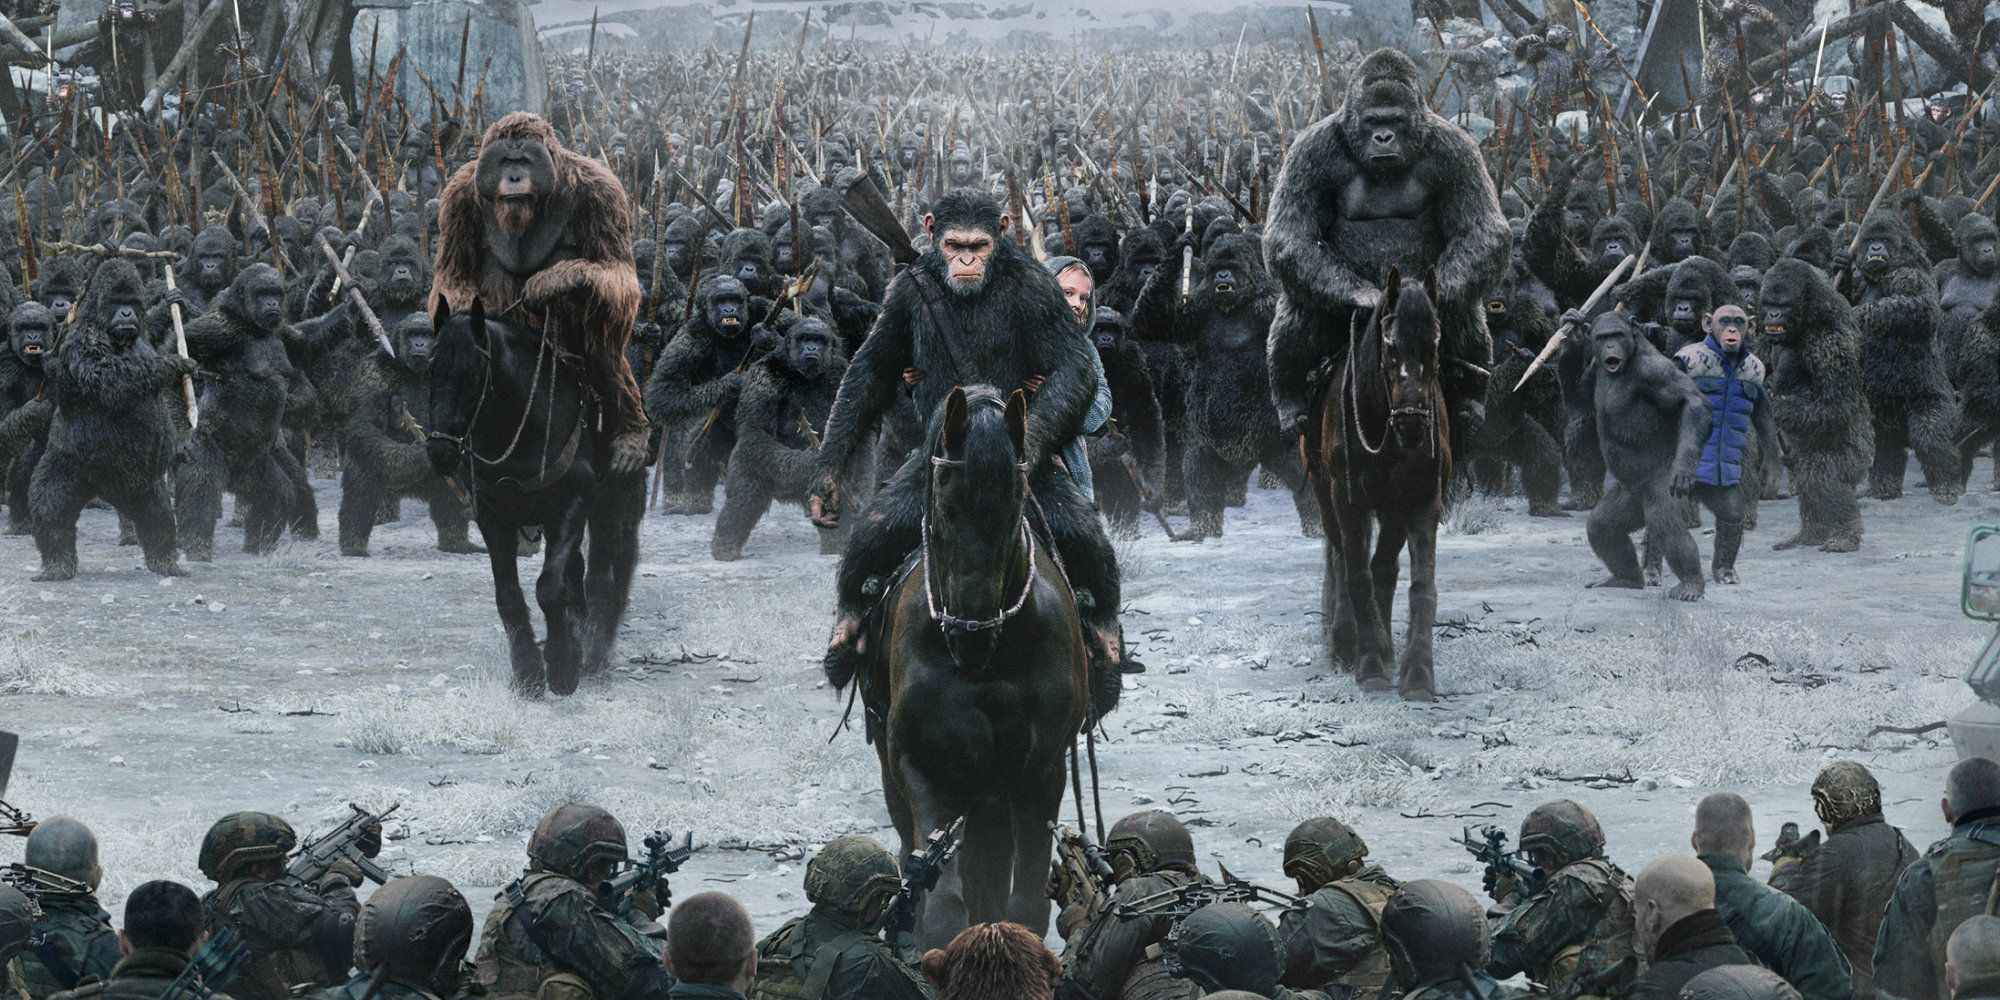 Caesar confronting humans with his army of apes in War for the Planet of the Apes 